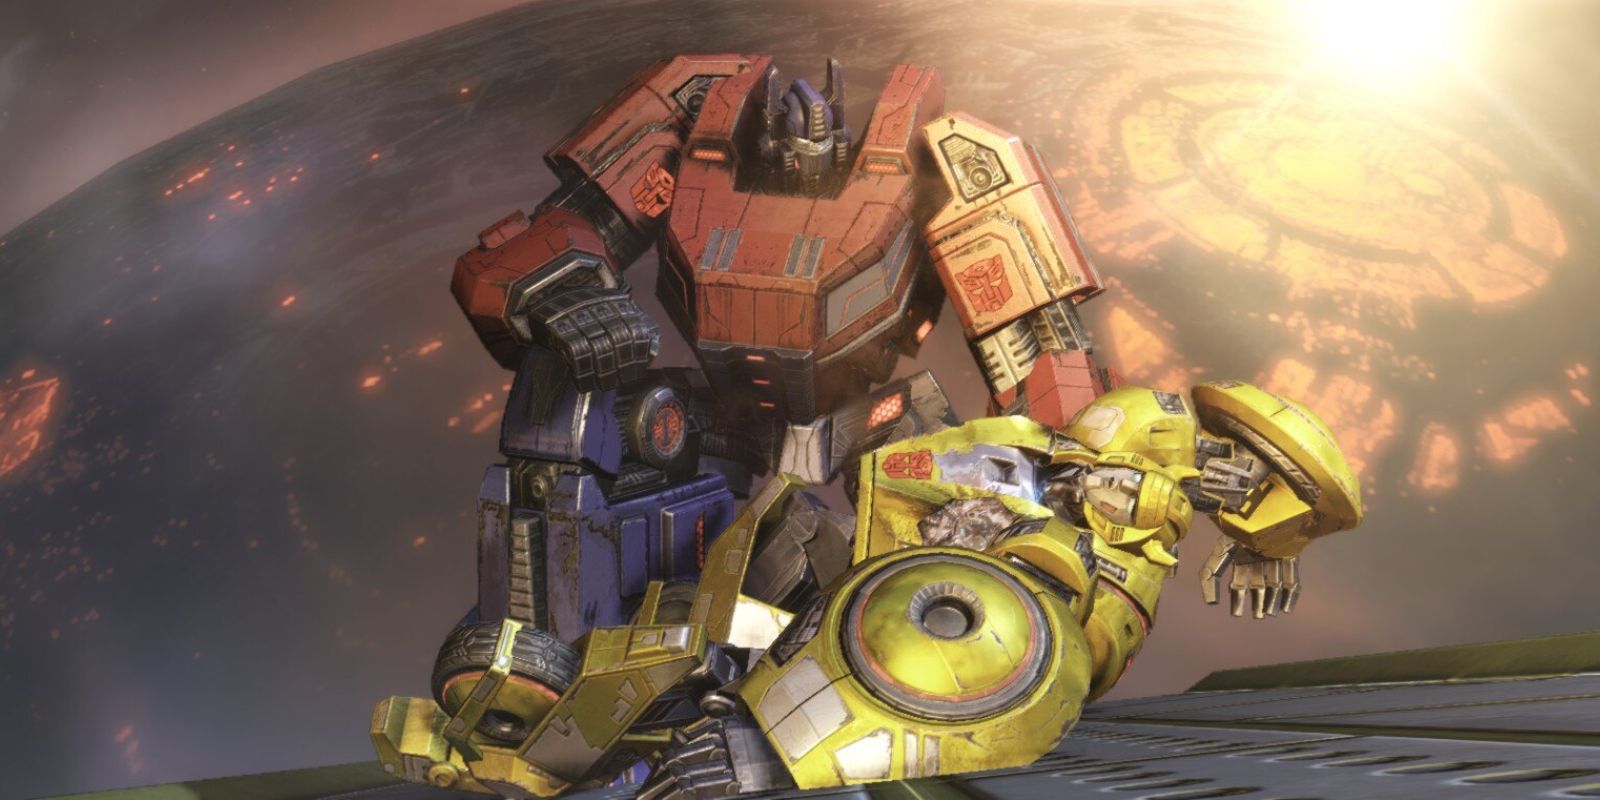 Optimus Prime holding a dying Bumblebee in Transformers Fall of Cybertron.